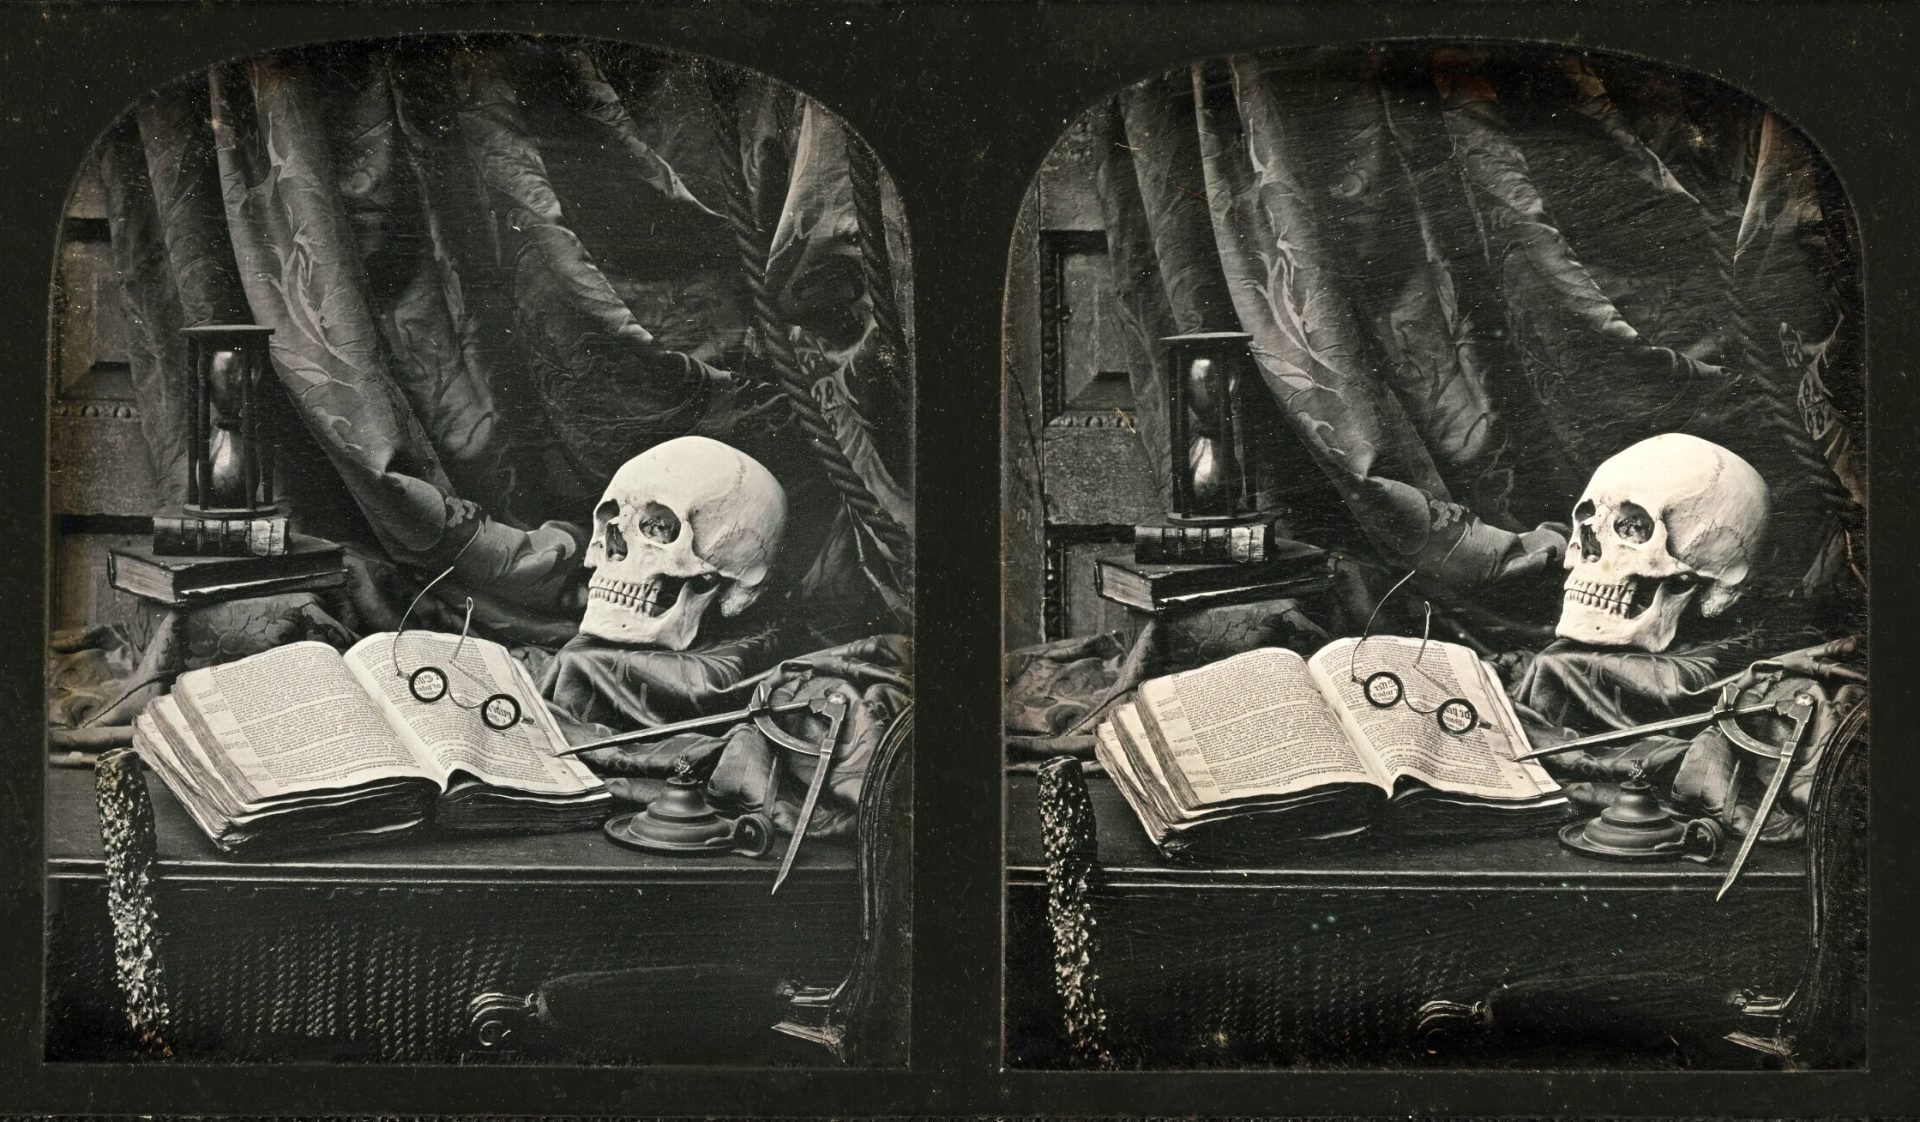 Stereograph photo by Thomas Richard Williams displaying a memento mori setup: a skull, nearly emptied hourglass, open compass, and an open book with overturned eyeglasses. The composition symbolizes life's fleeting nature and the certainty of death, while also alluding to intellectual endeavors and the soul's ultimate supremacy over the intellect.